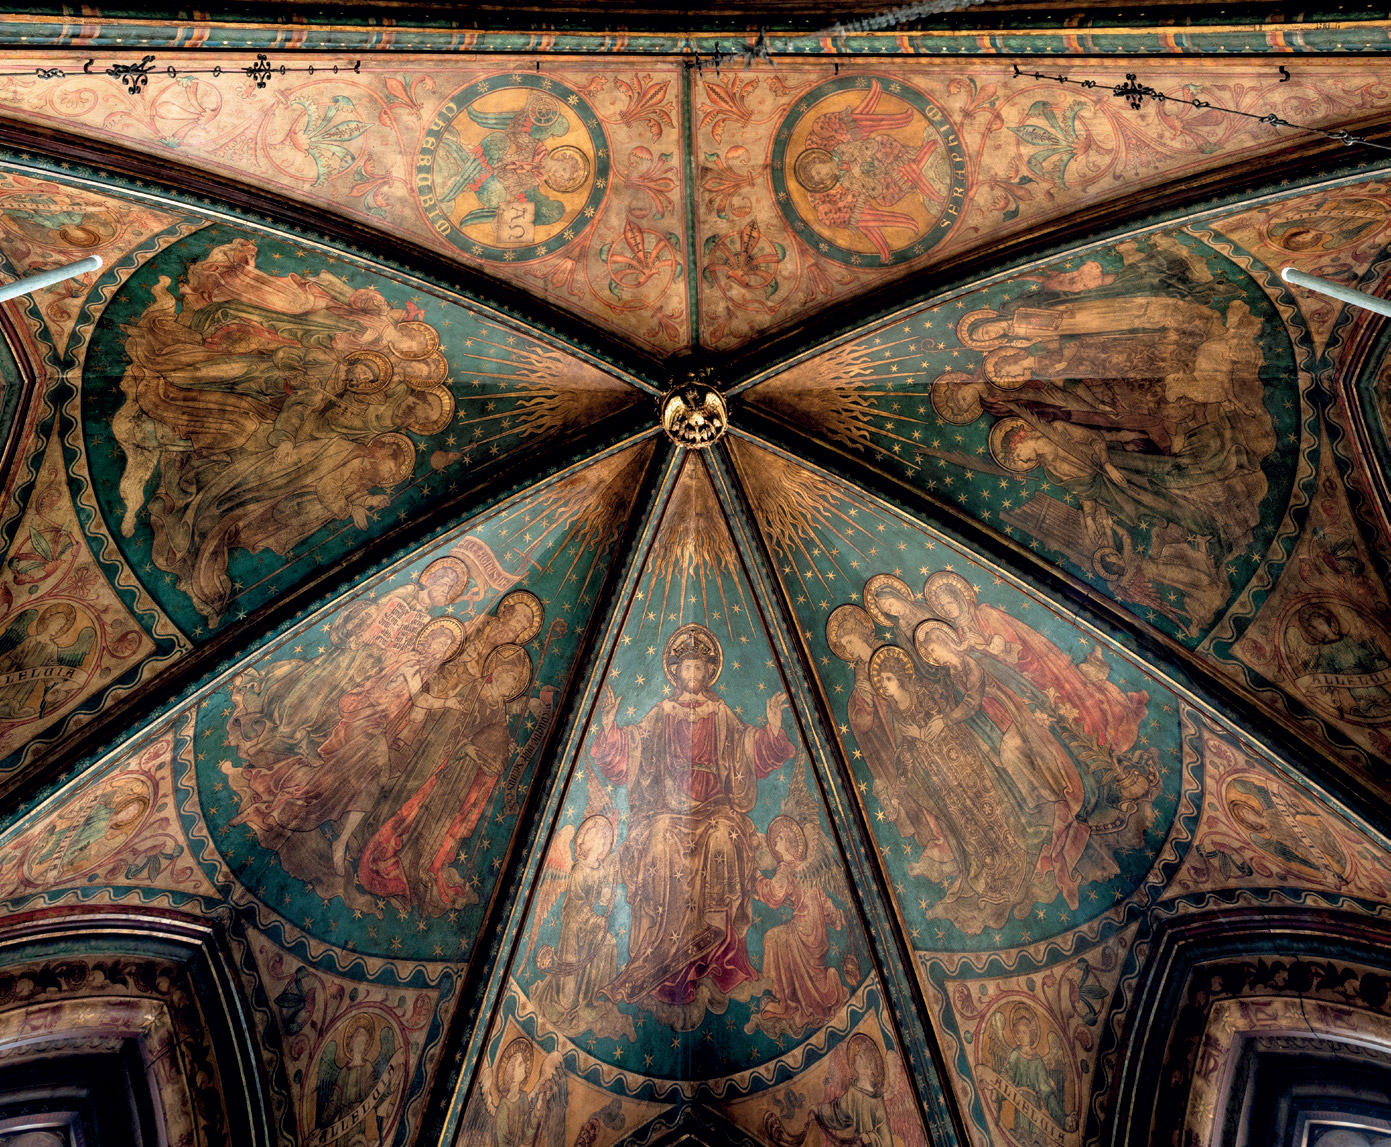 The chancel ceiling after conservation